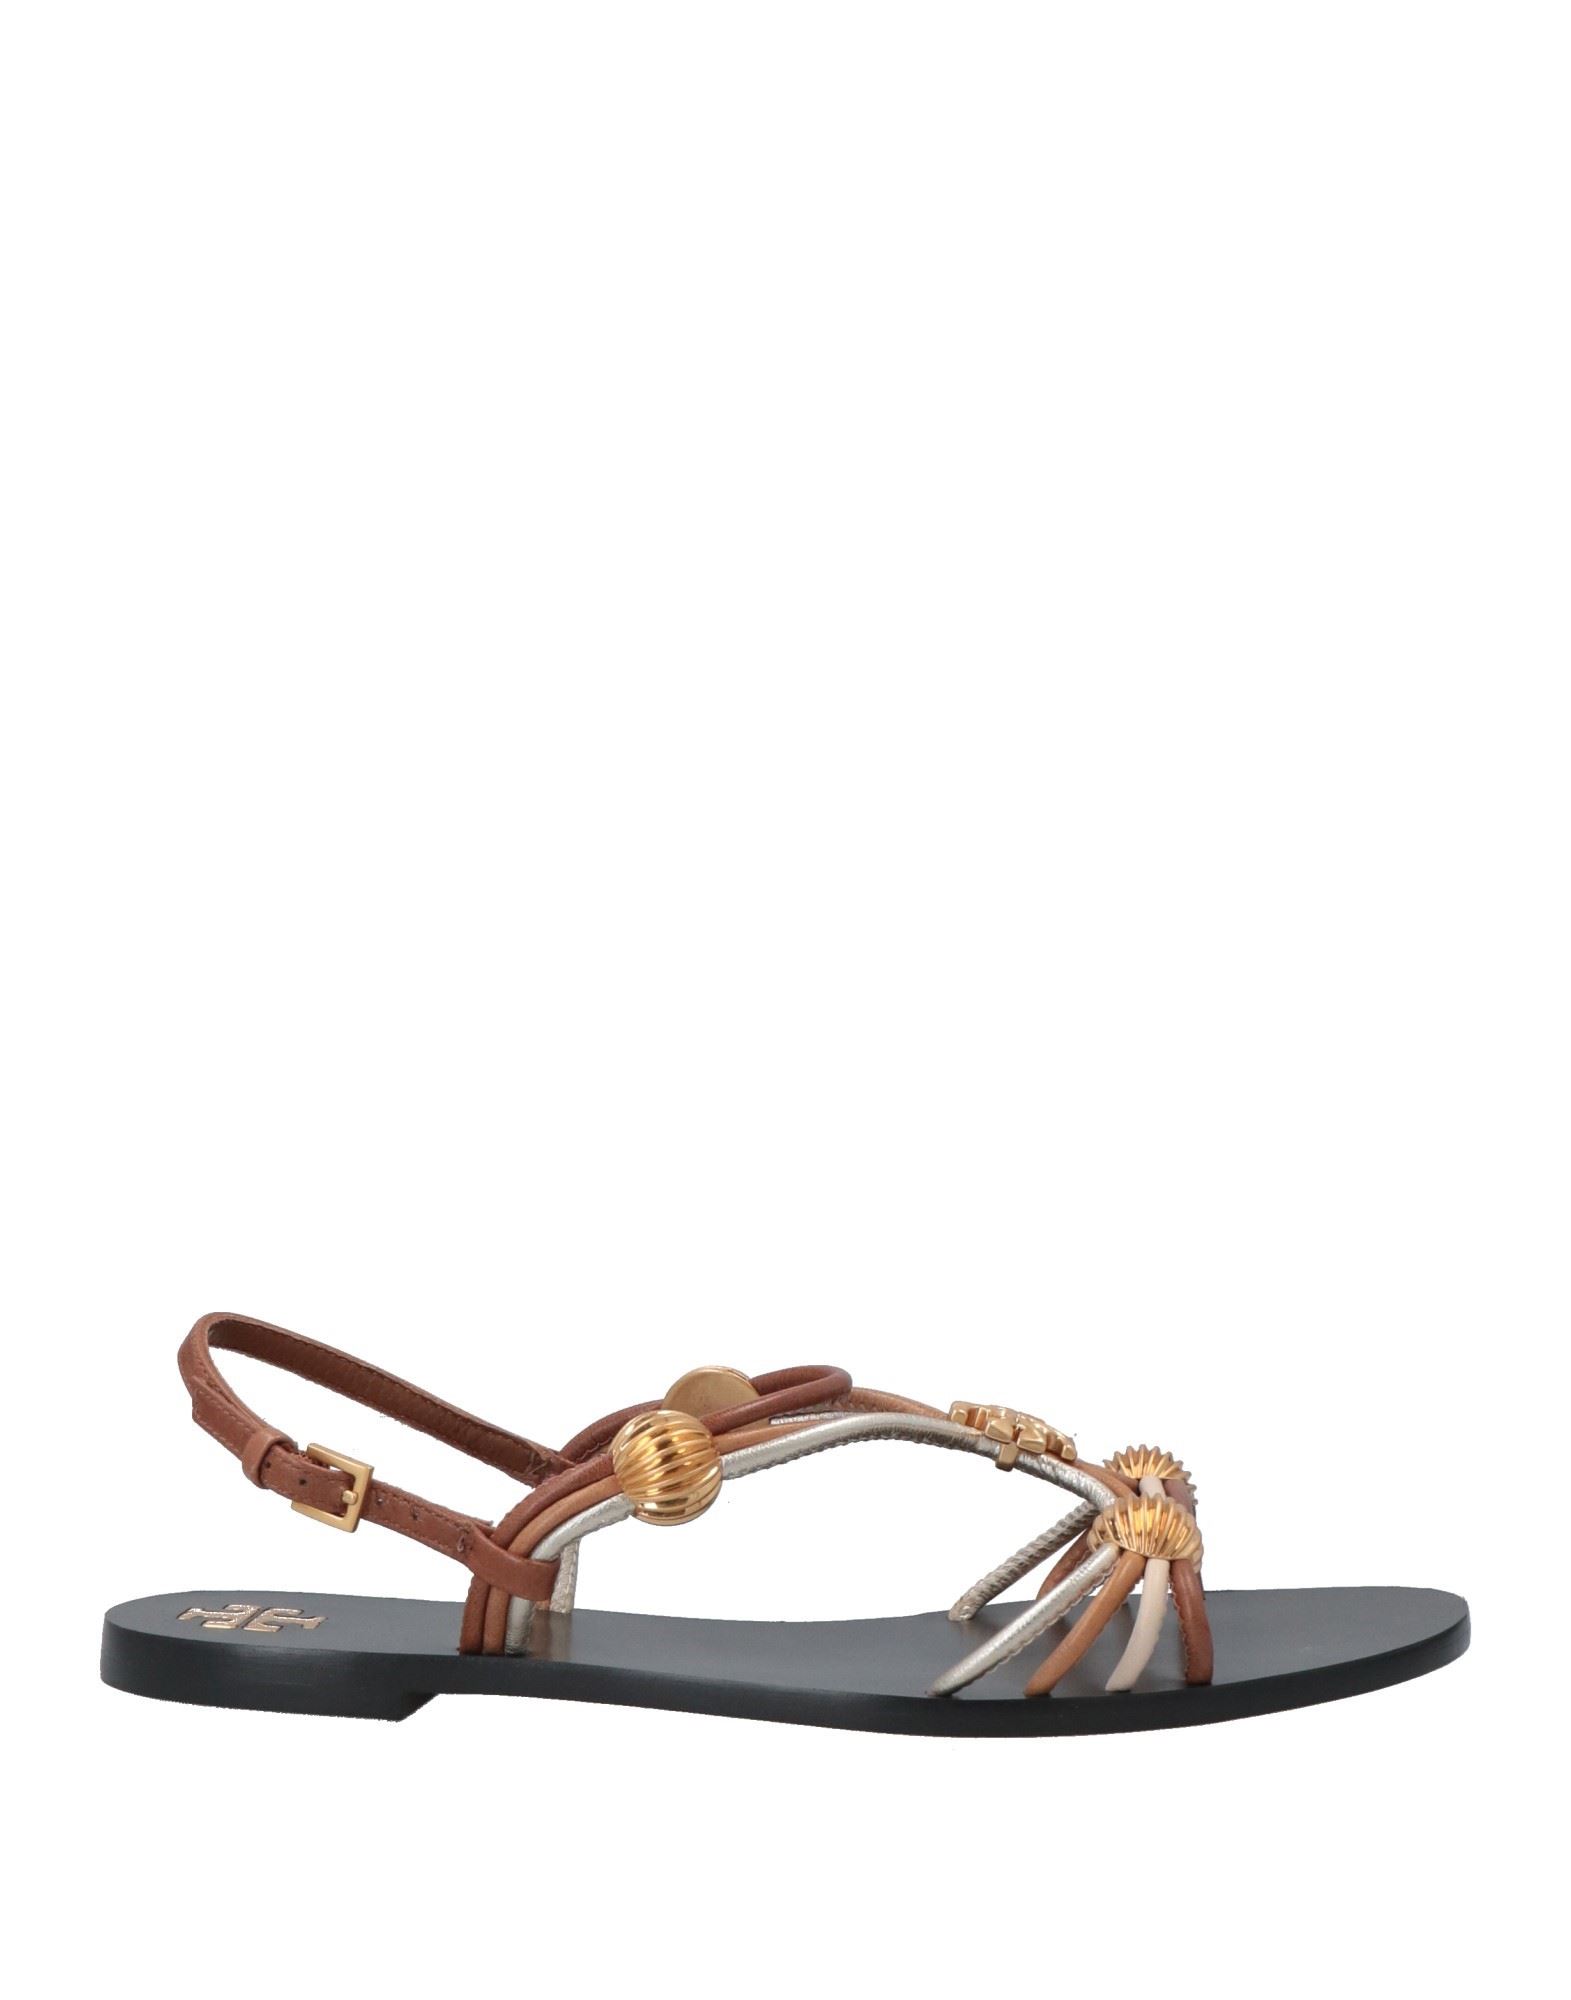 Tory Burch Sandals In Brown | ModeSens